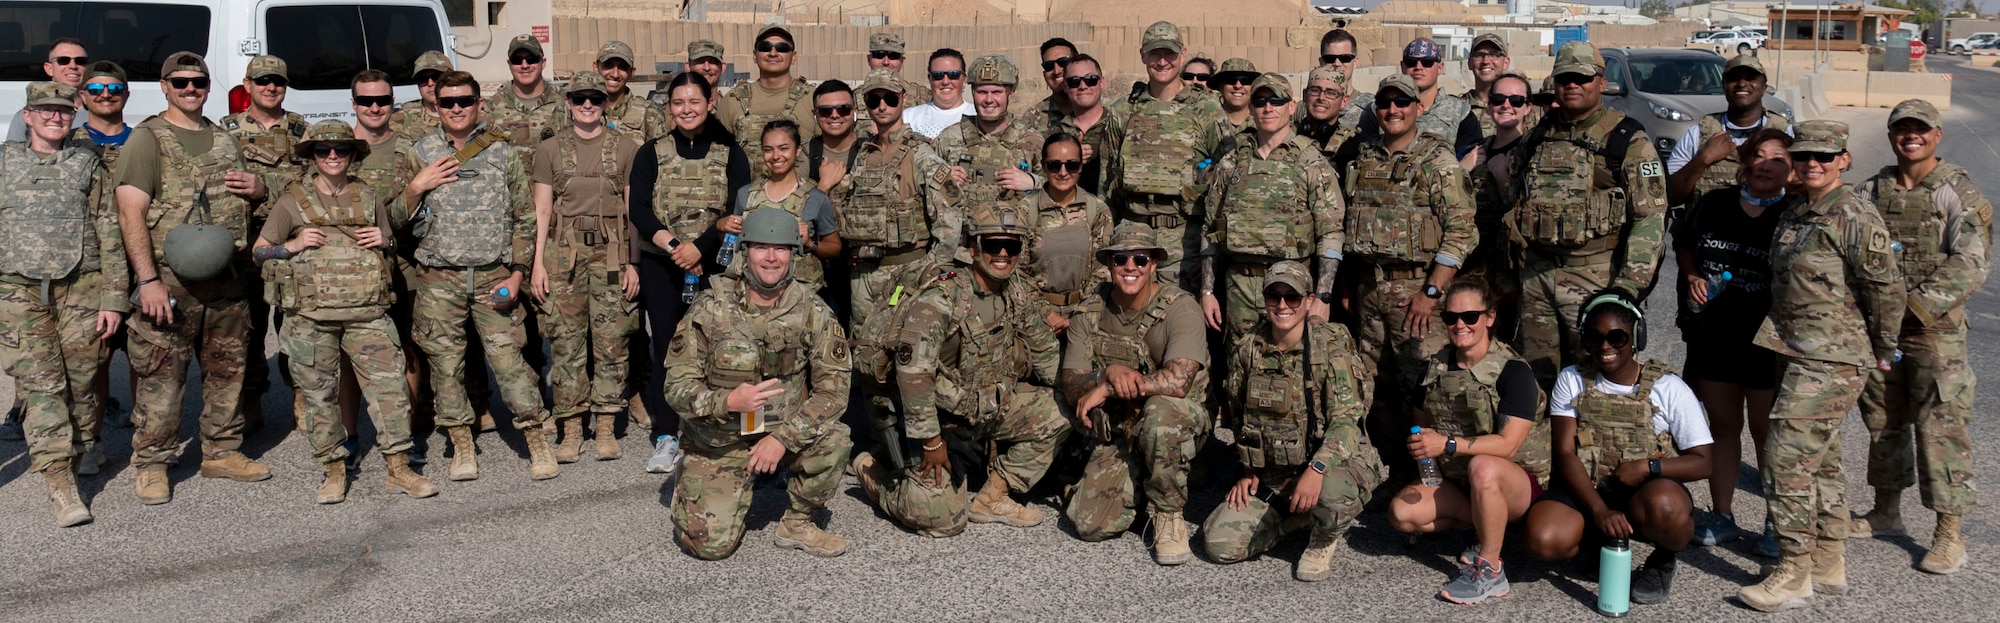 332d Air Expeditionary Wing honors those lost aboard Extortion 17 in Afghanistan